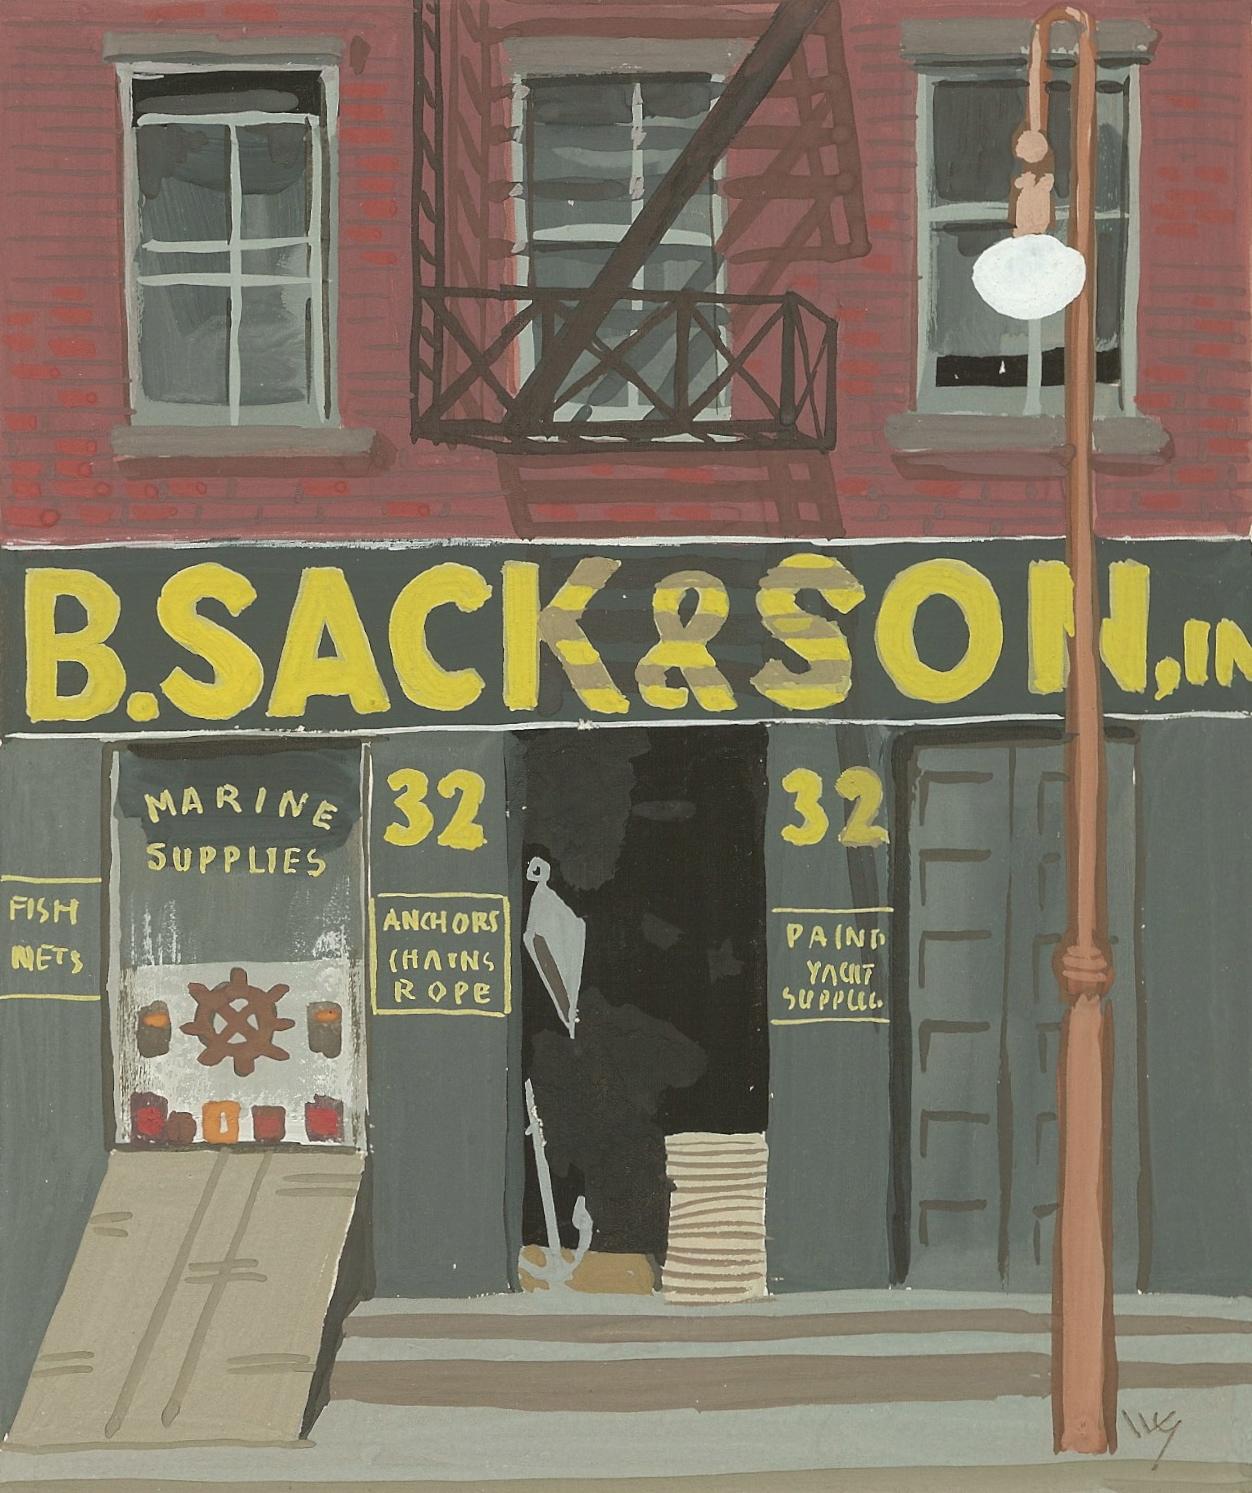 This gouache, by Witold Gordon, is one of a series commissioned by Conde Nast which were published in Vanity Fair magazine in July 1934 under the banner “New York Shops You Never See.” Framed to 9